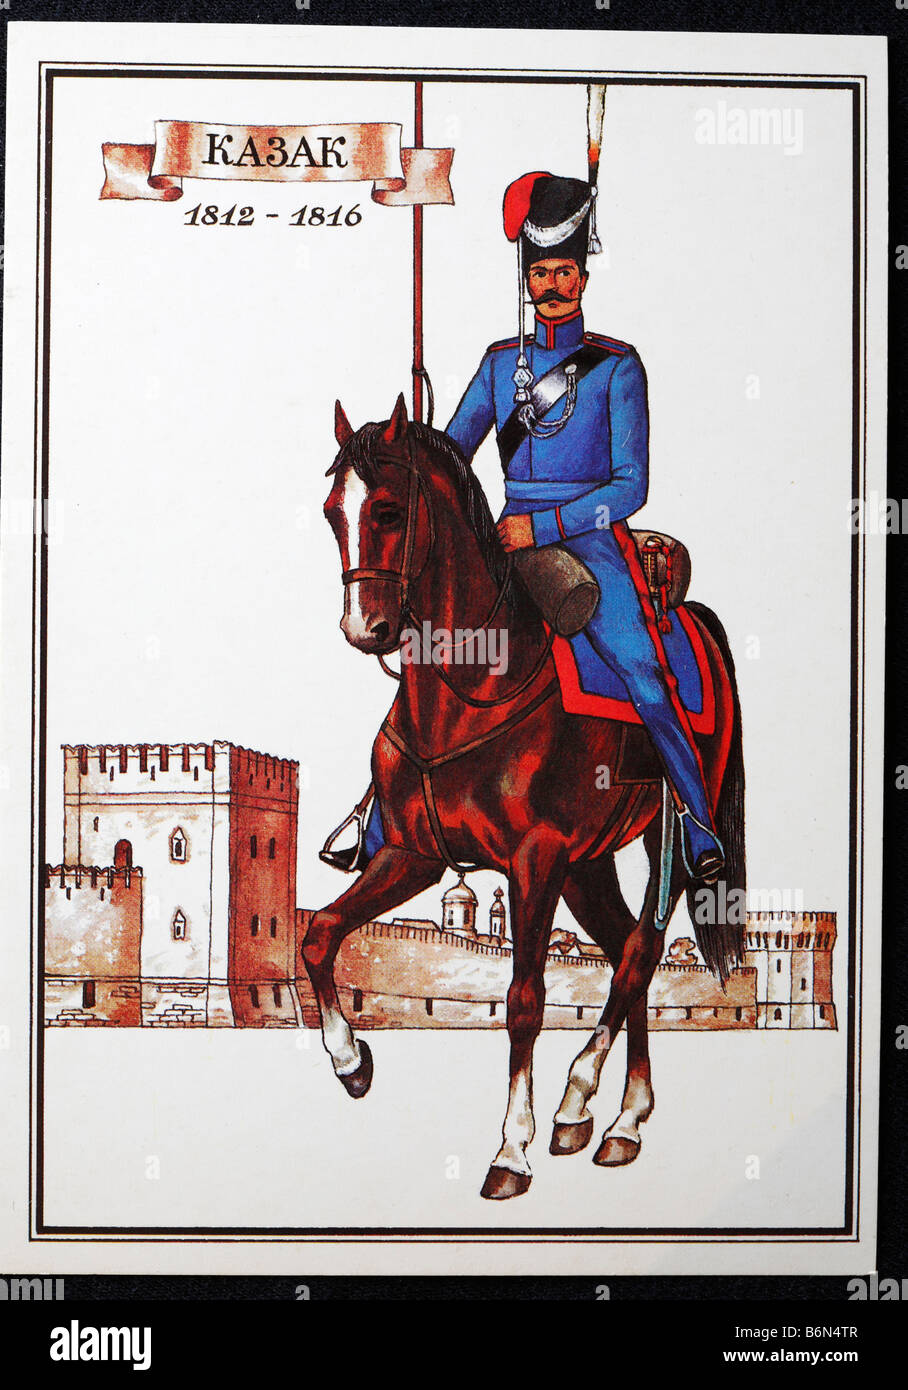 Uniform of Don Cossack in Russian army (1812-1816), postcard, USSR, 1986 Stock Photo